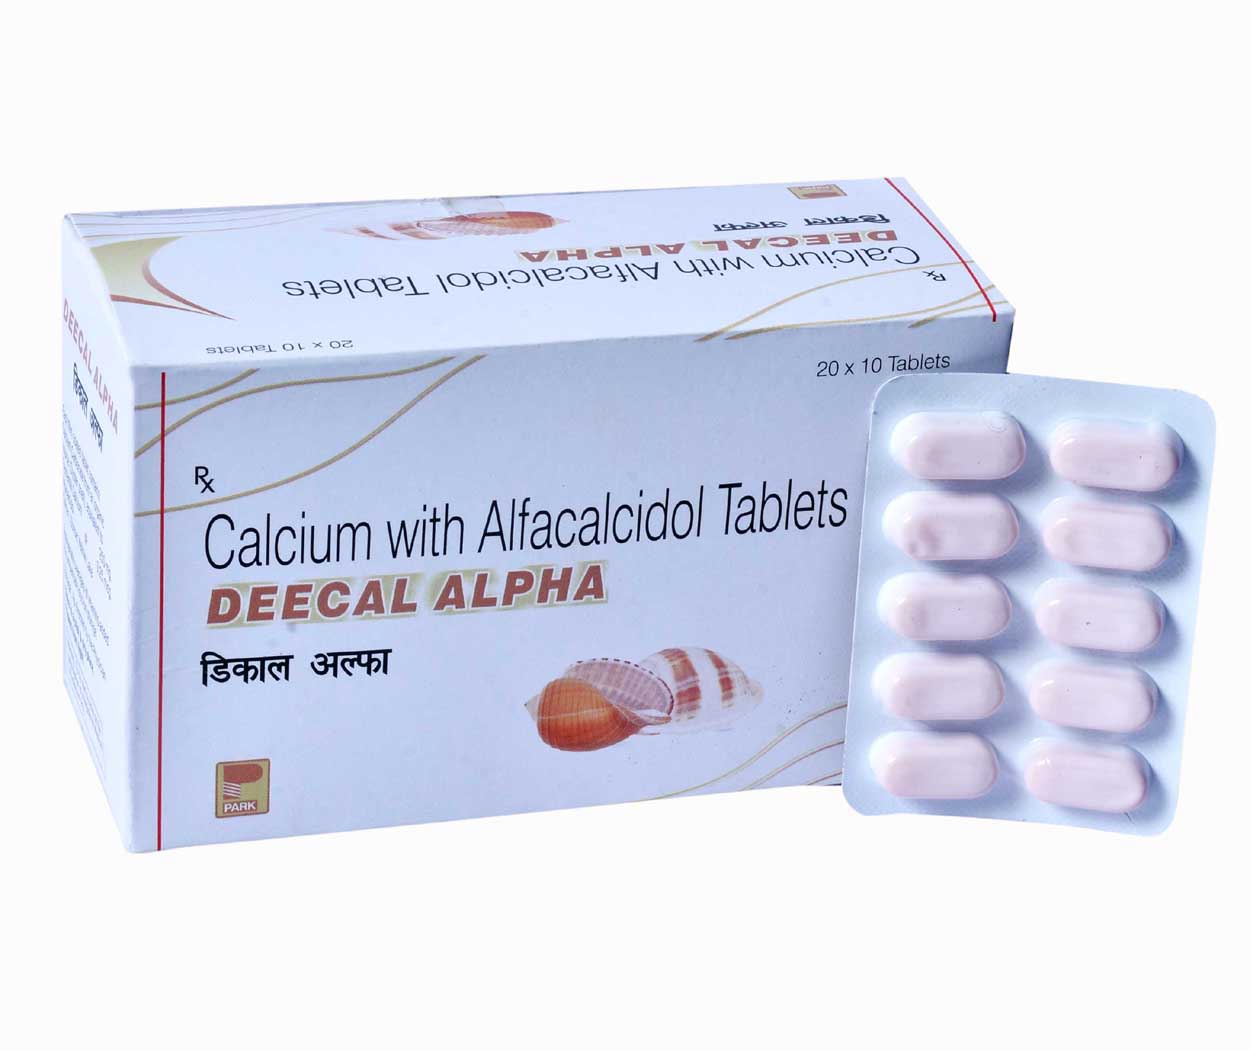 Product Name: DEECAL ALPHA, Compositions of DEECAL ALPHA are Calcium with Alfacalcidol Tablets - Park Pharmaceuticals